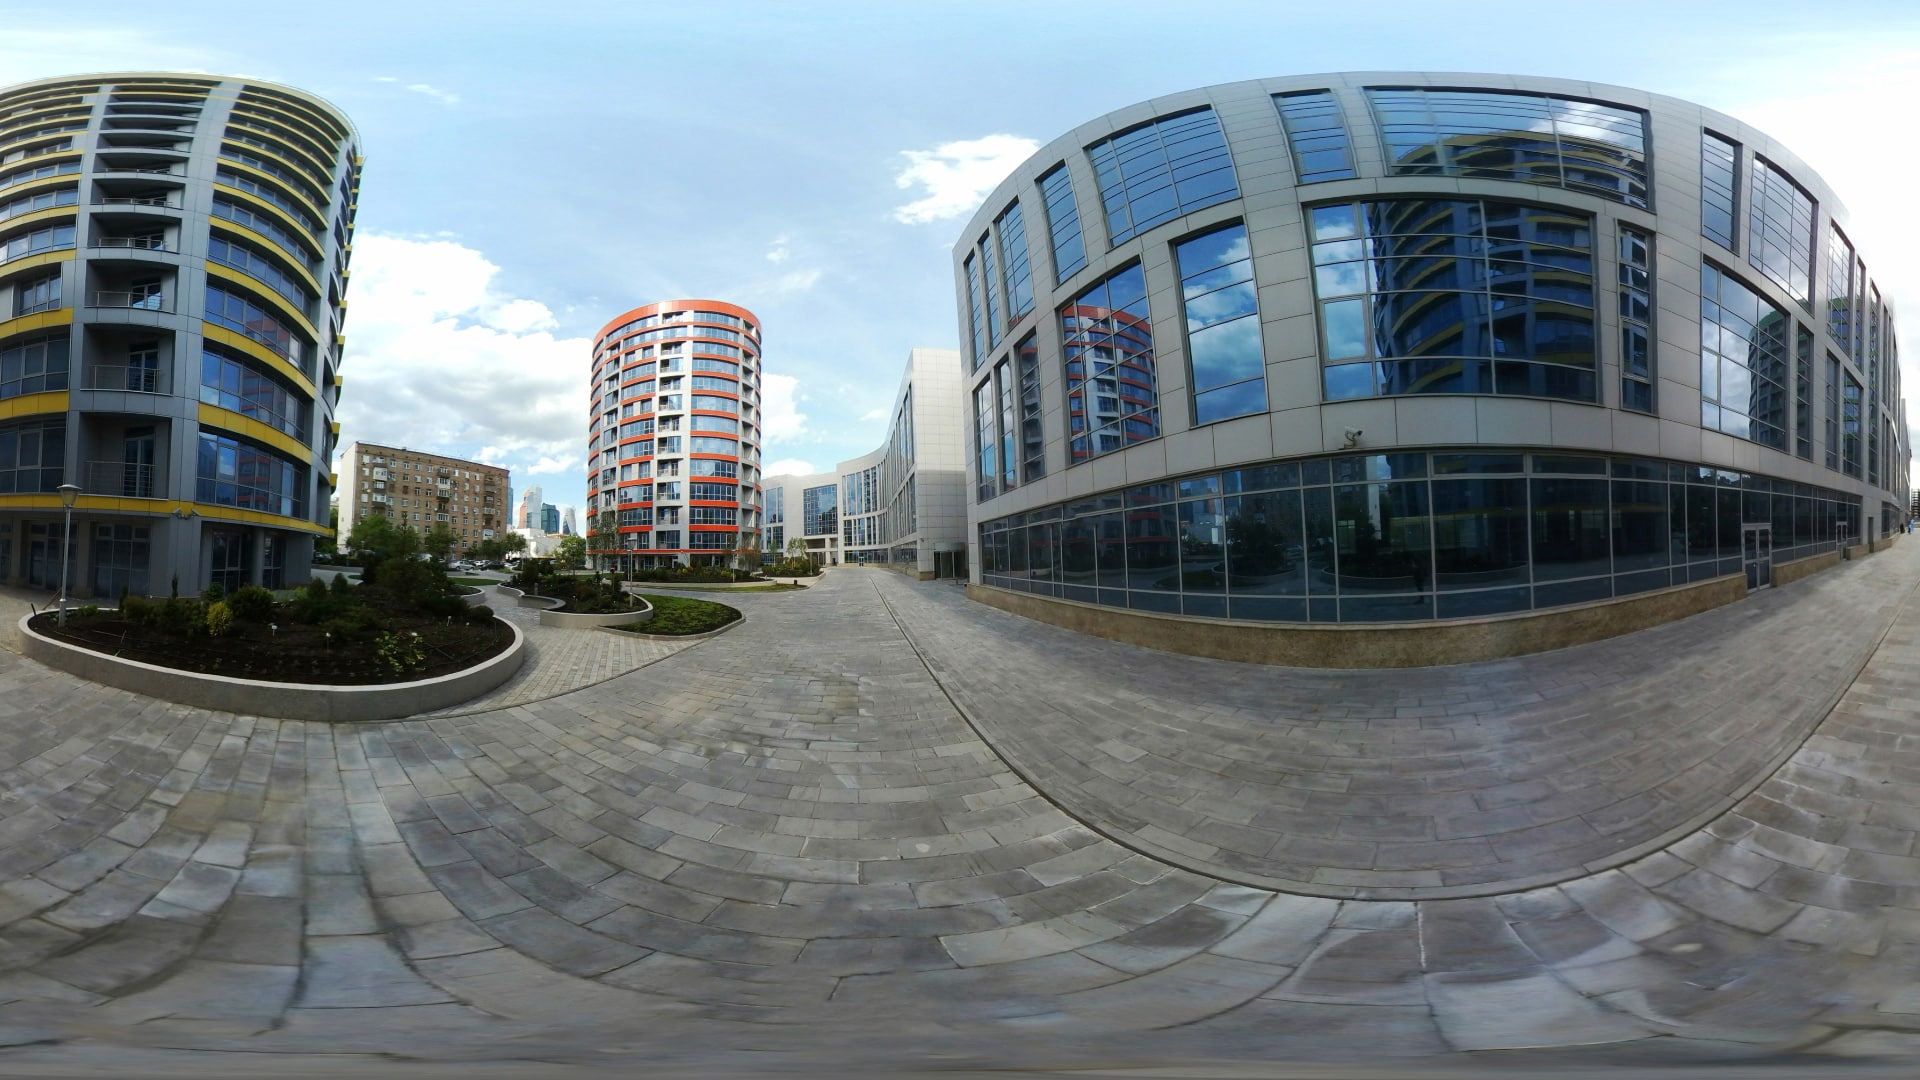 360 view of buildings - building with lots of windows are shown in a new development. The buildings warp as the viewer moves the camera to walk through the buildings.